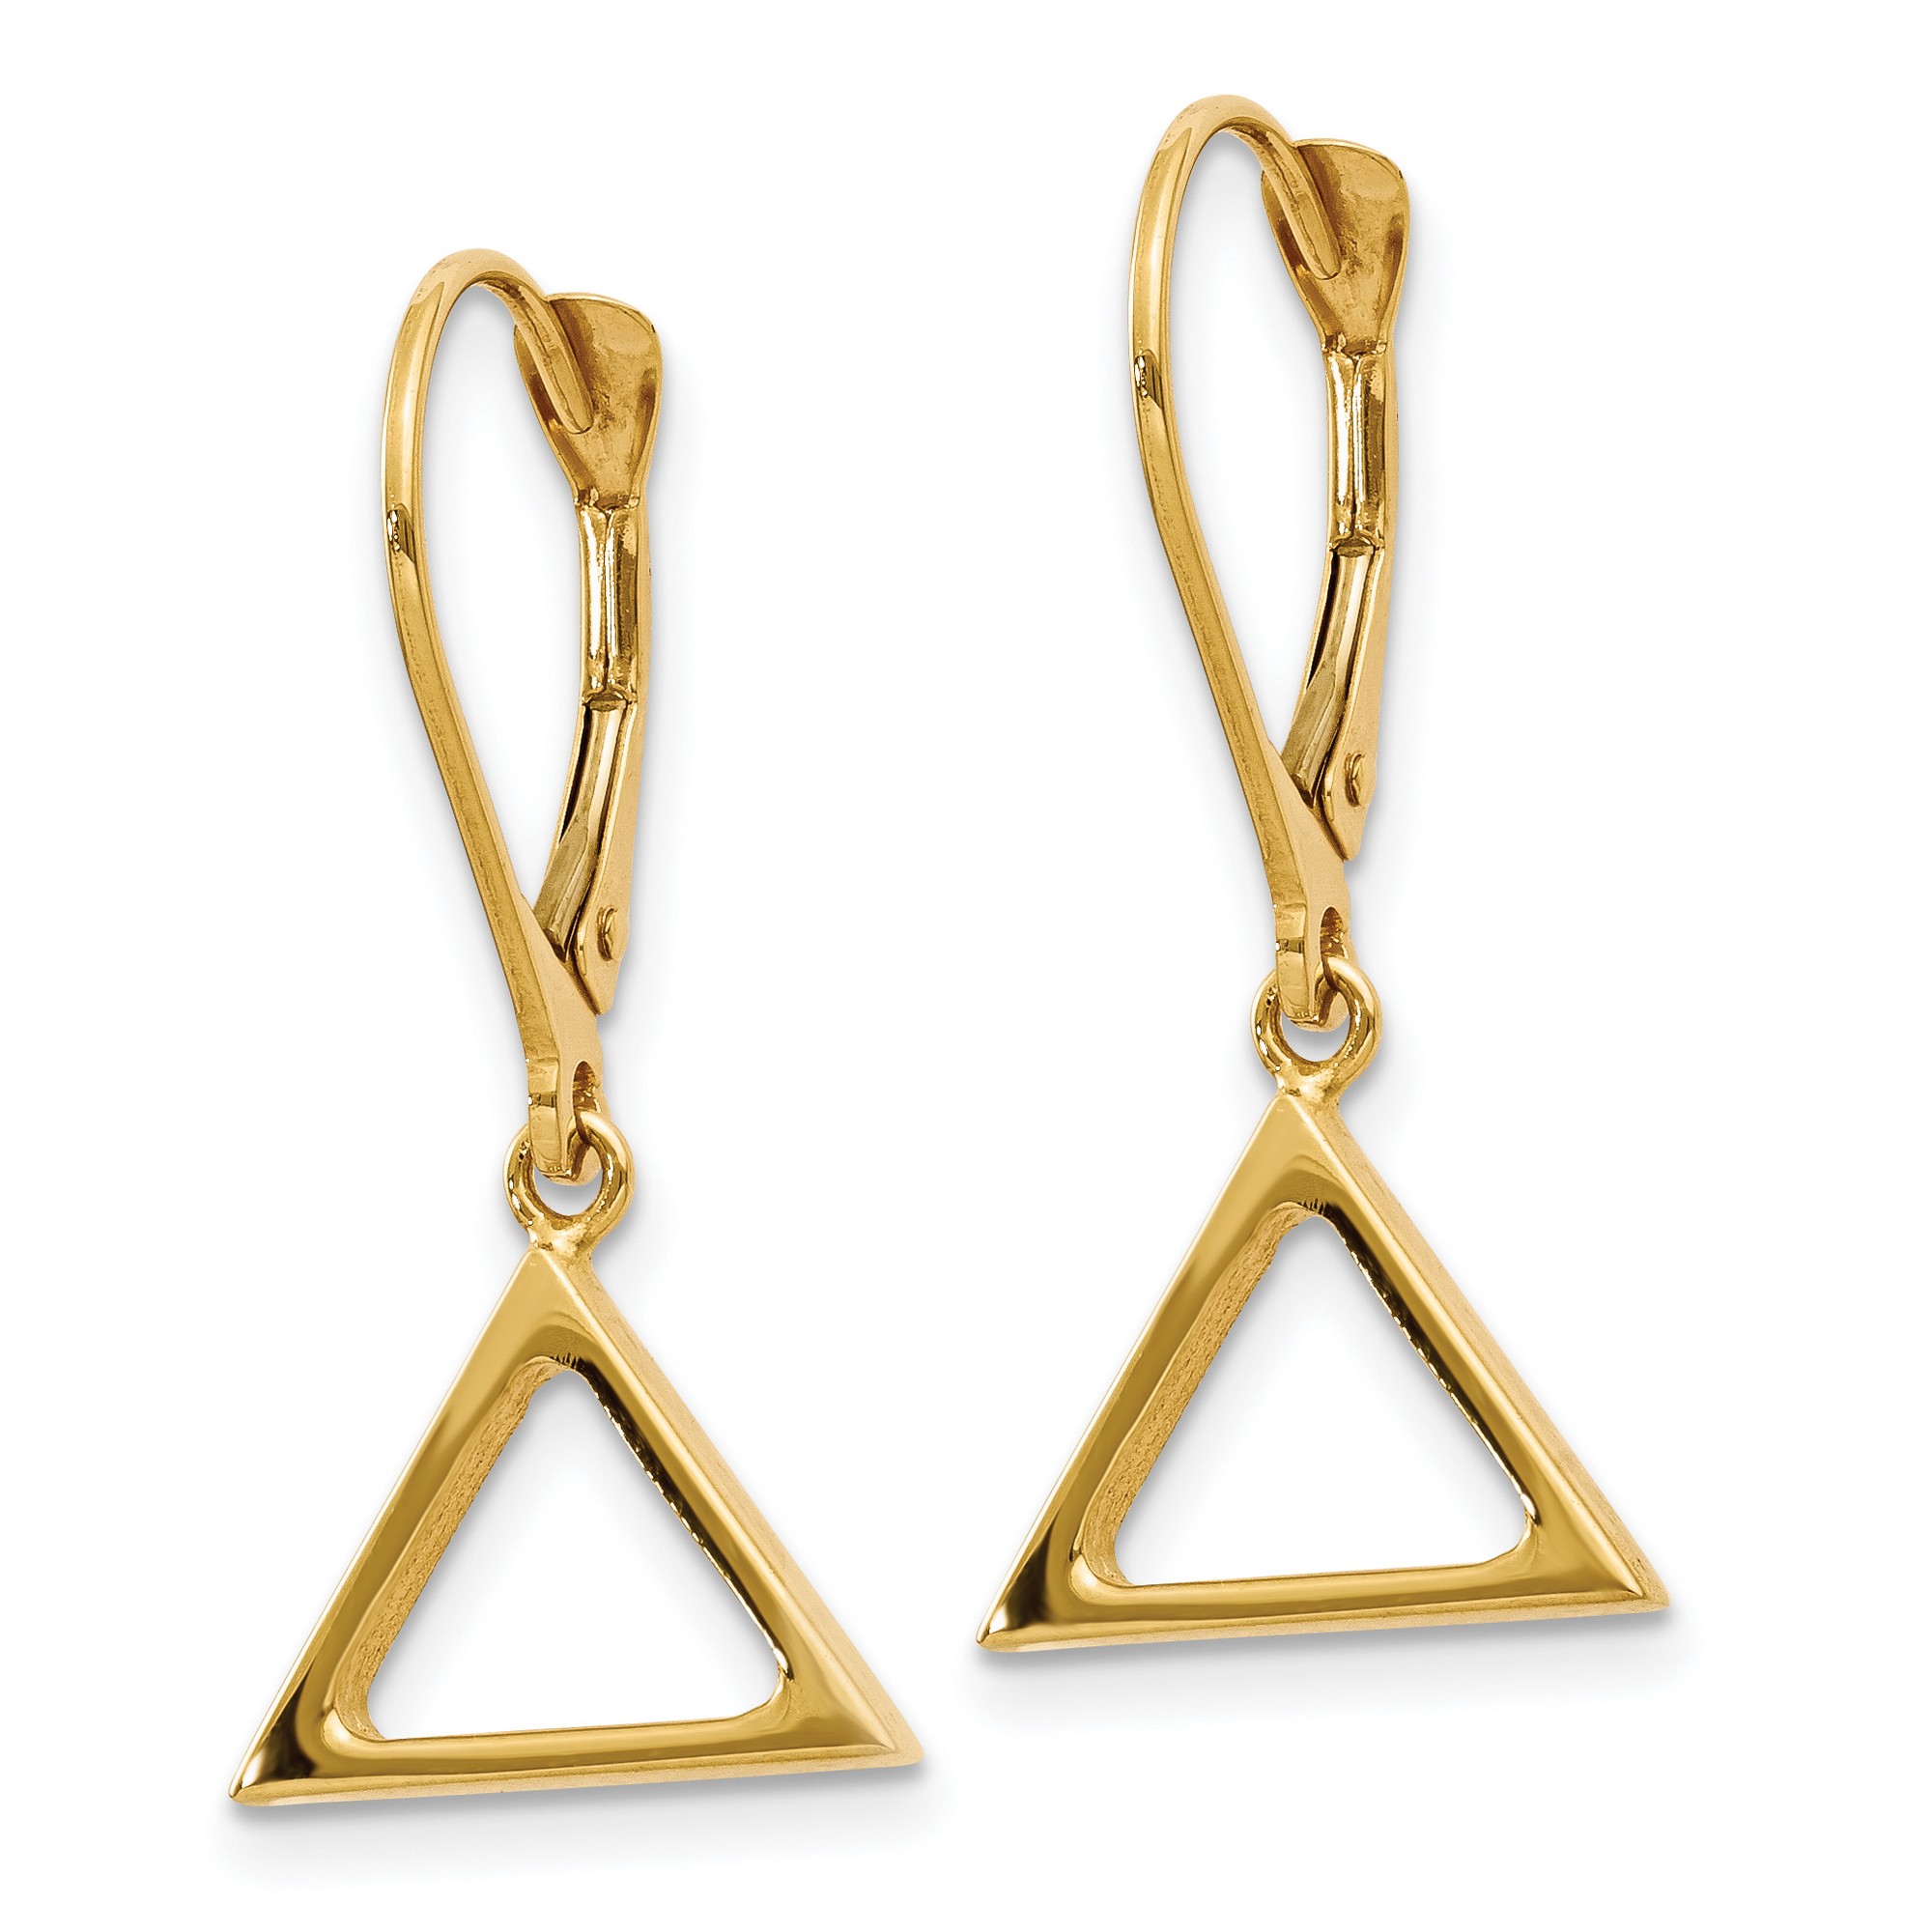 14k Yellow Gold Polished Triangle Dangle Leverback Earrings 26x12 mm - image 2 of 5